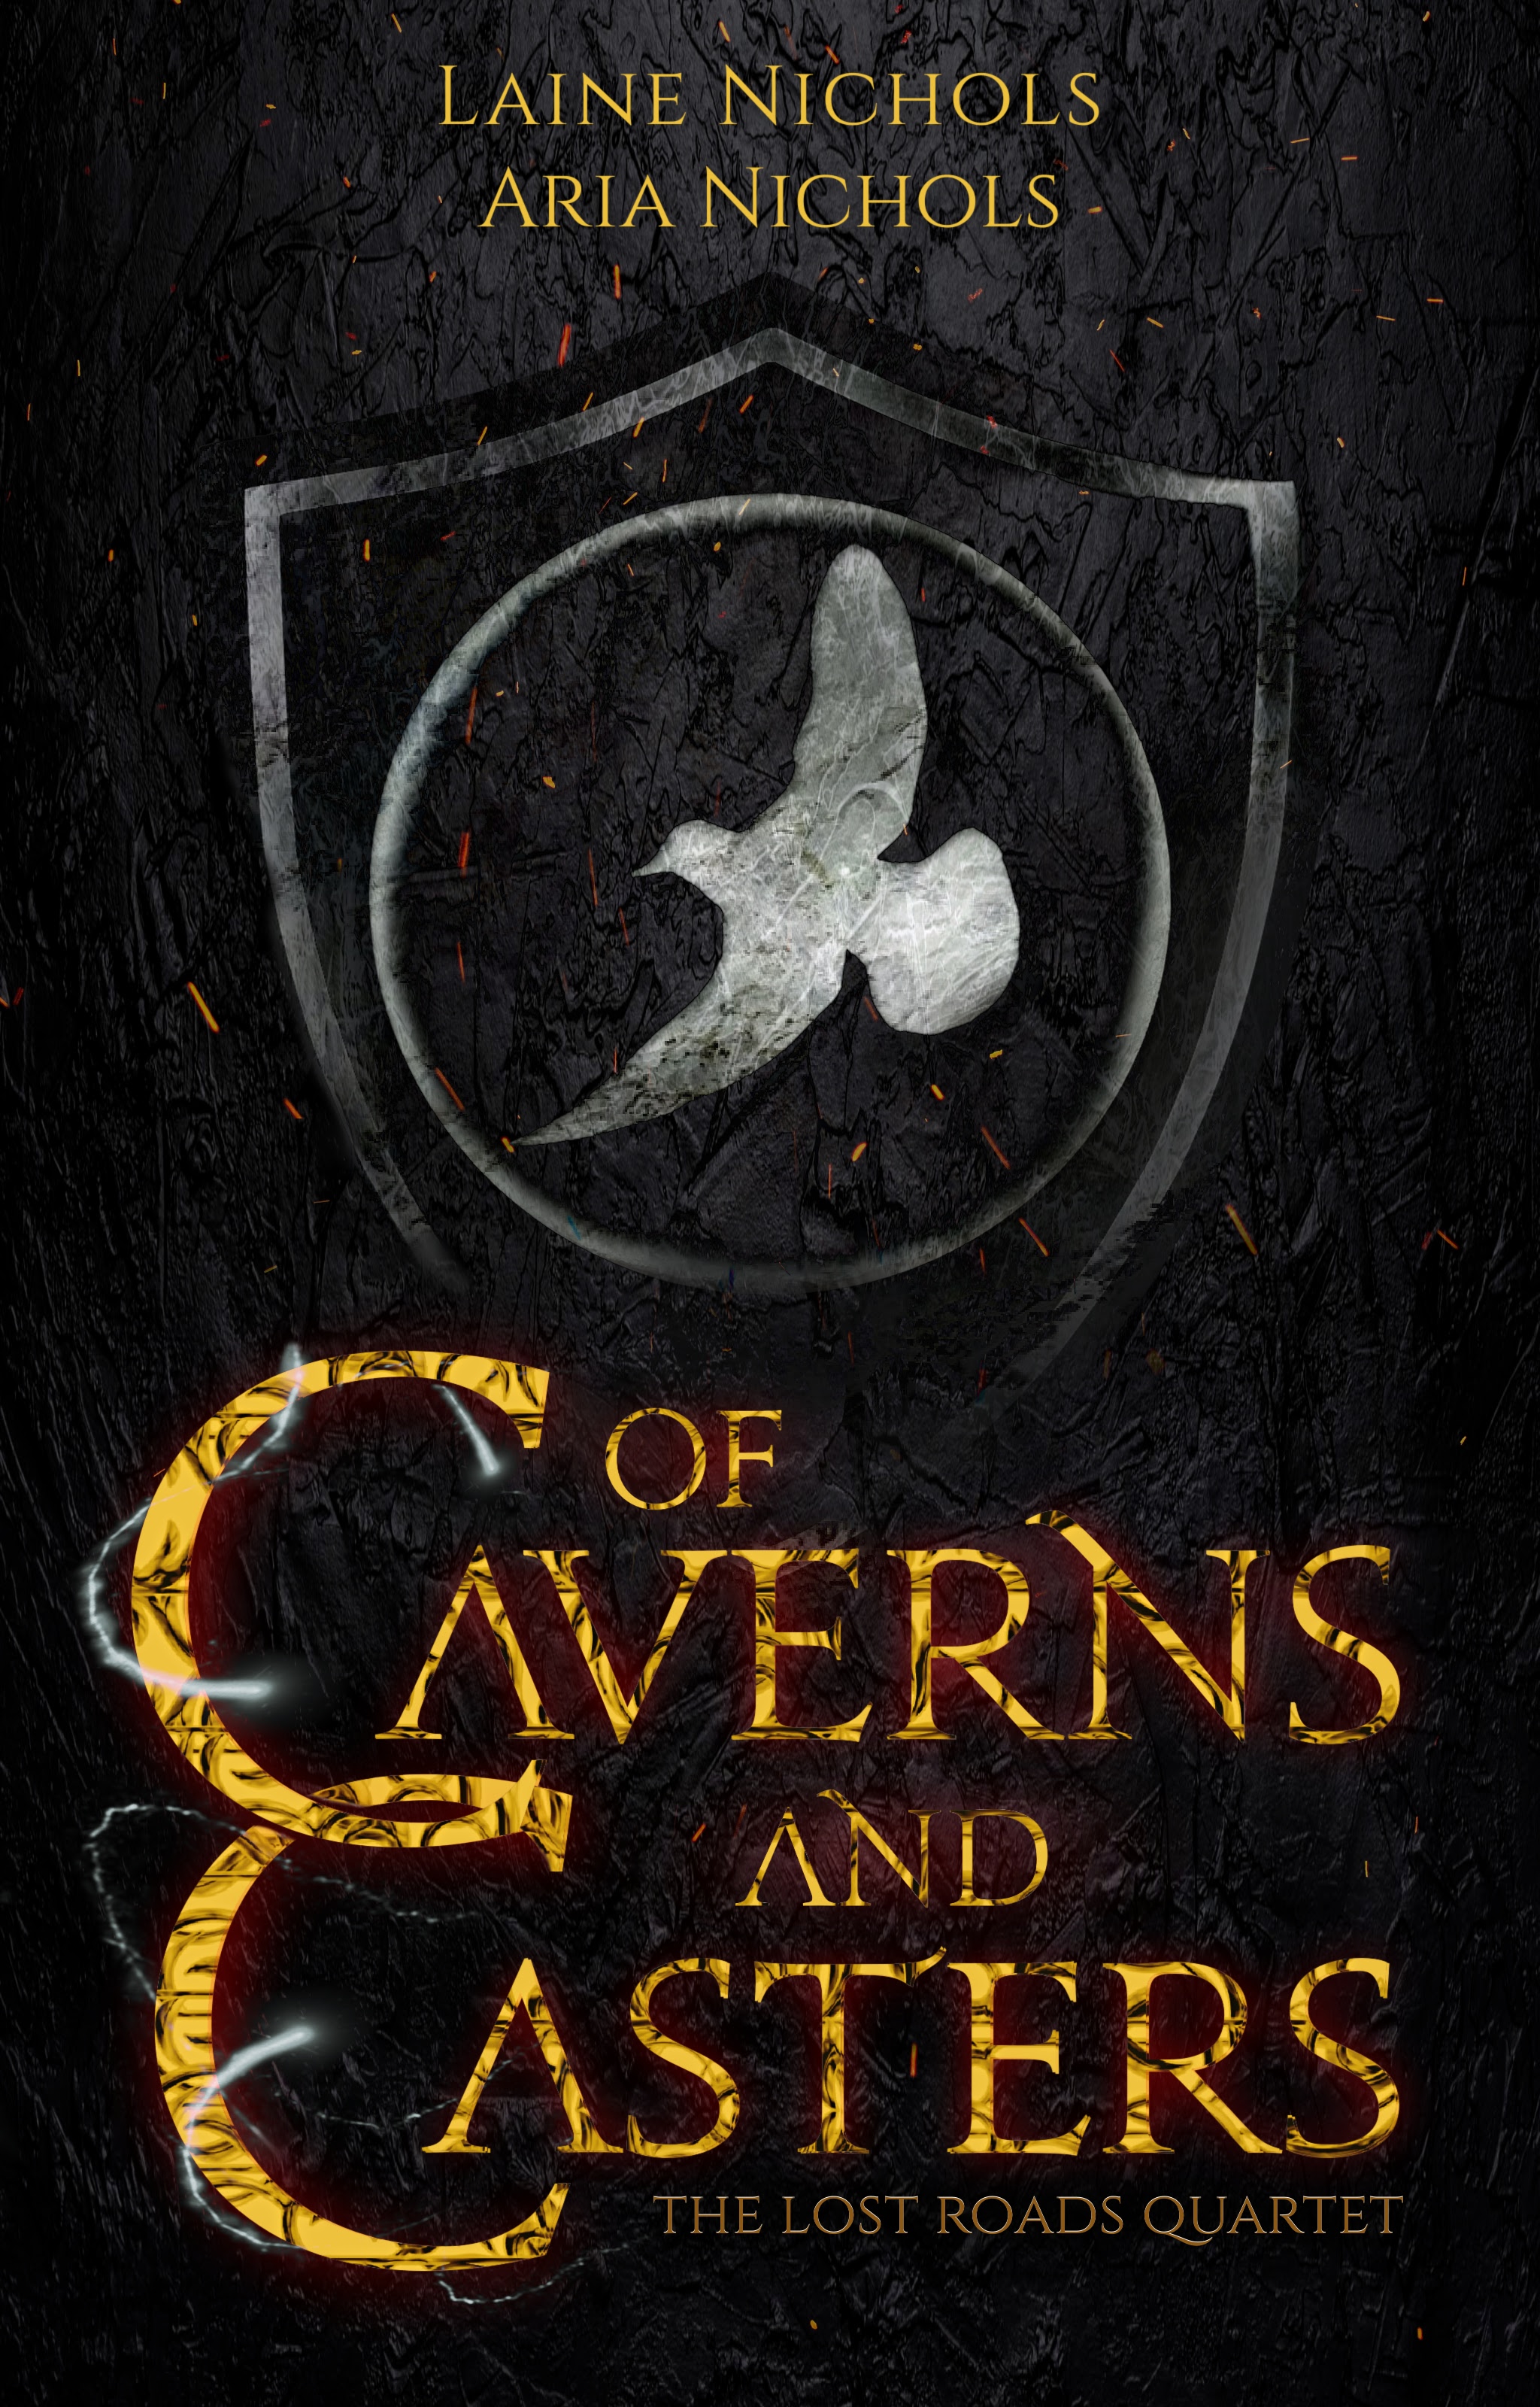 167-of-caverns-and-casters-rerelease.jpg